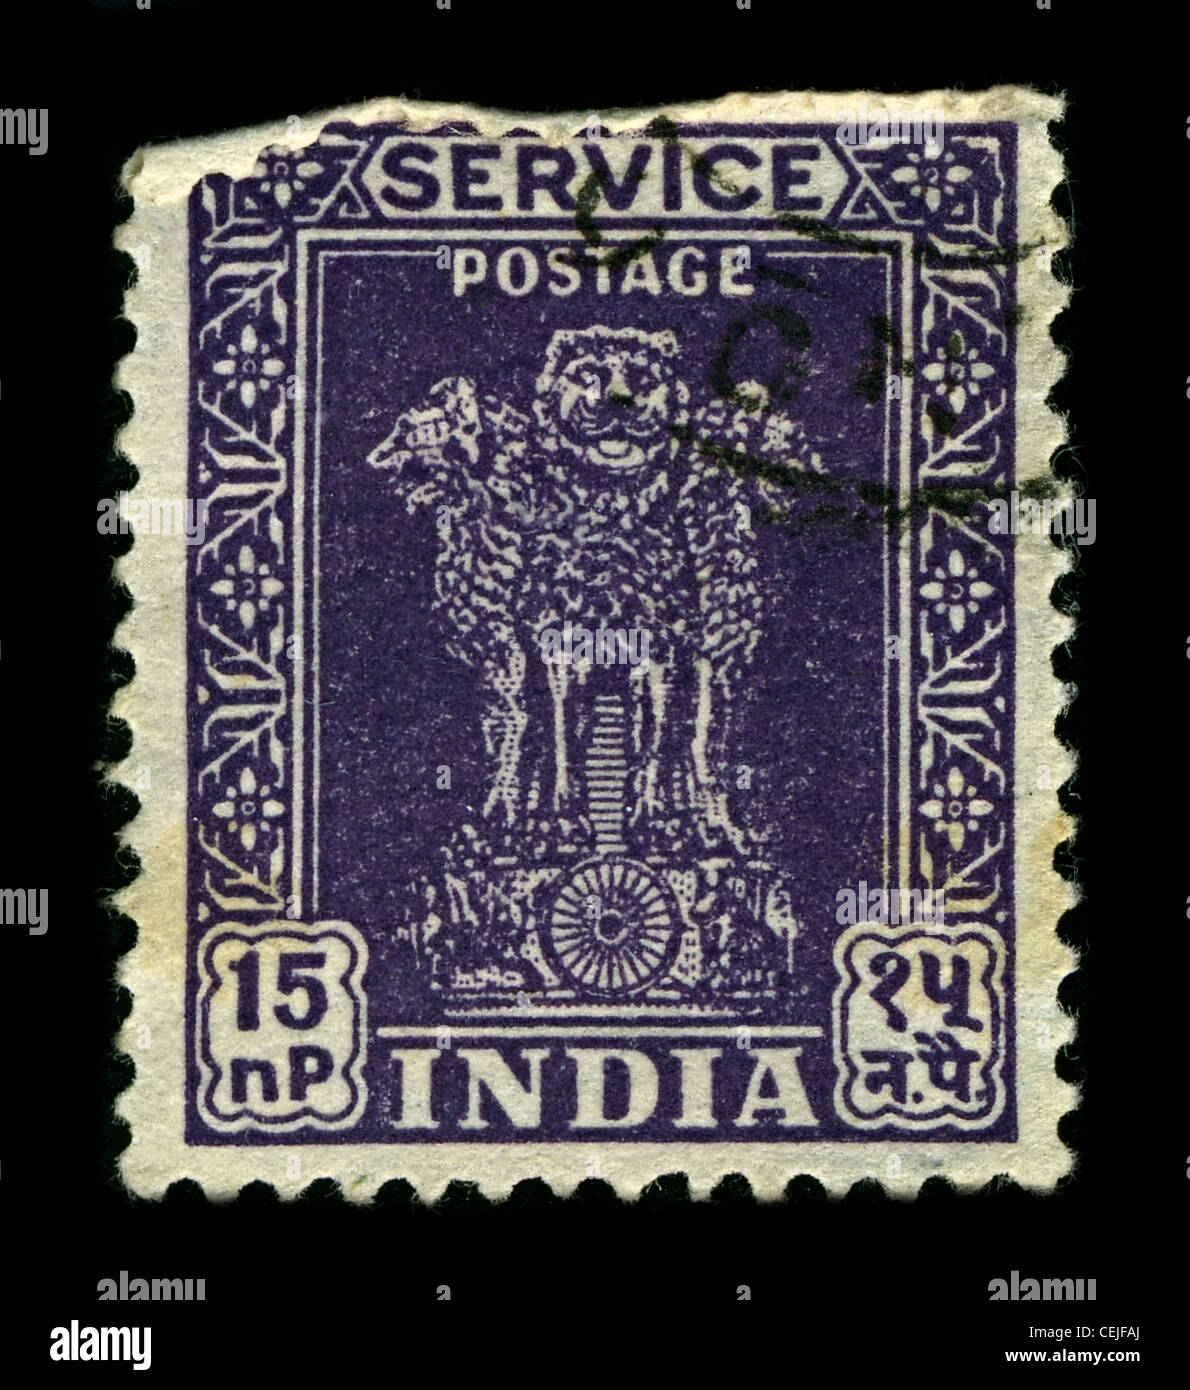 INDIA-CIRCA 1957:A stamp printed in INDIA shows image of The emblem of India is an adaptation of the Sarnath Lion Capital of Ashoka, circa 1957. Stock Photo